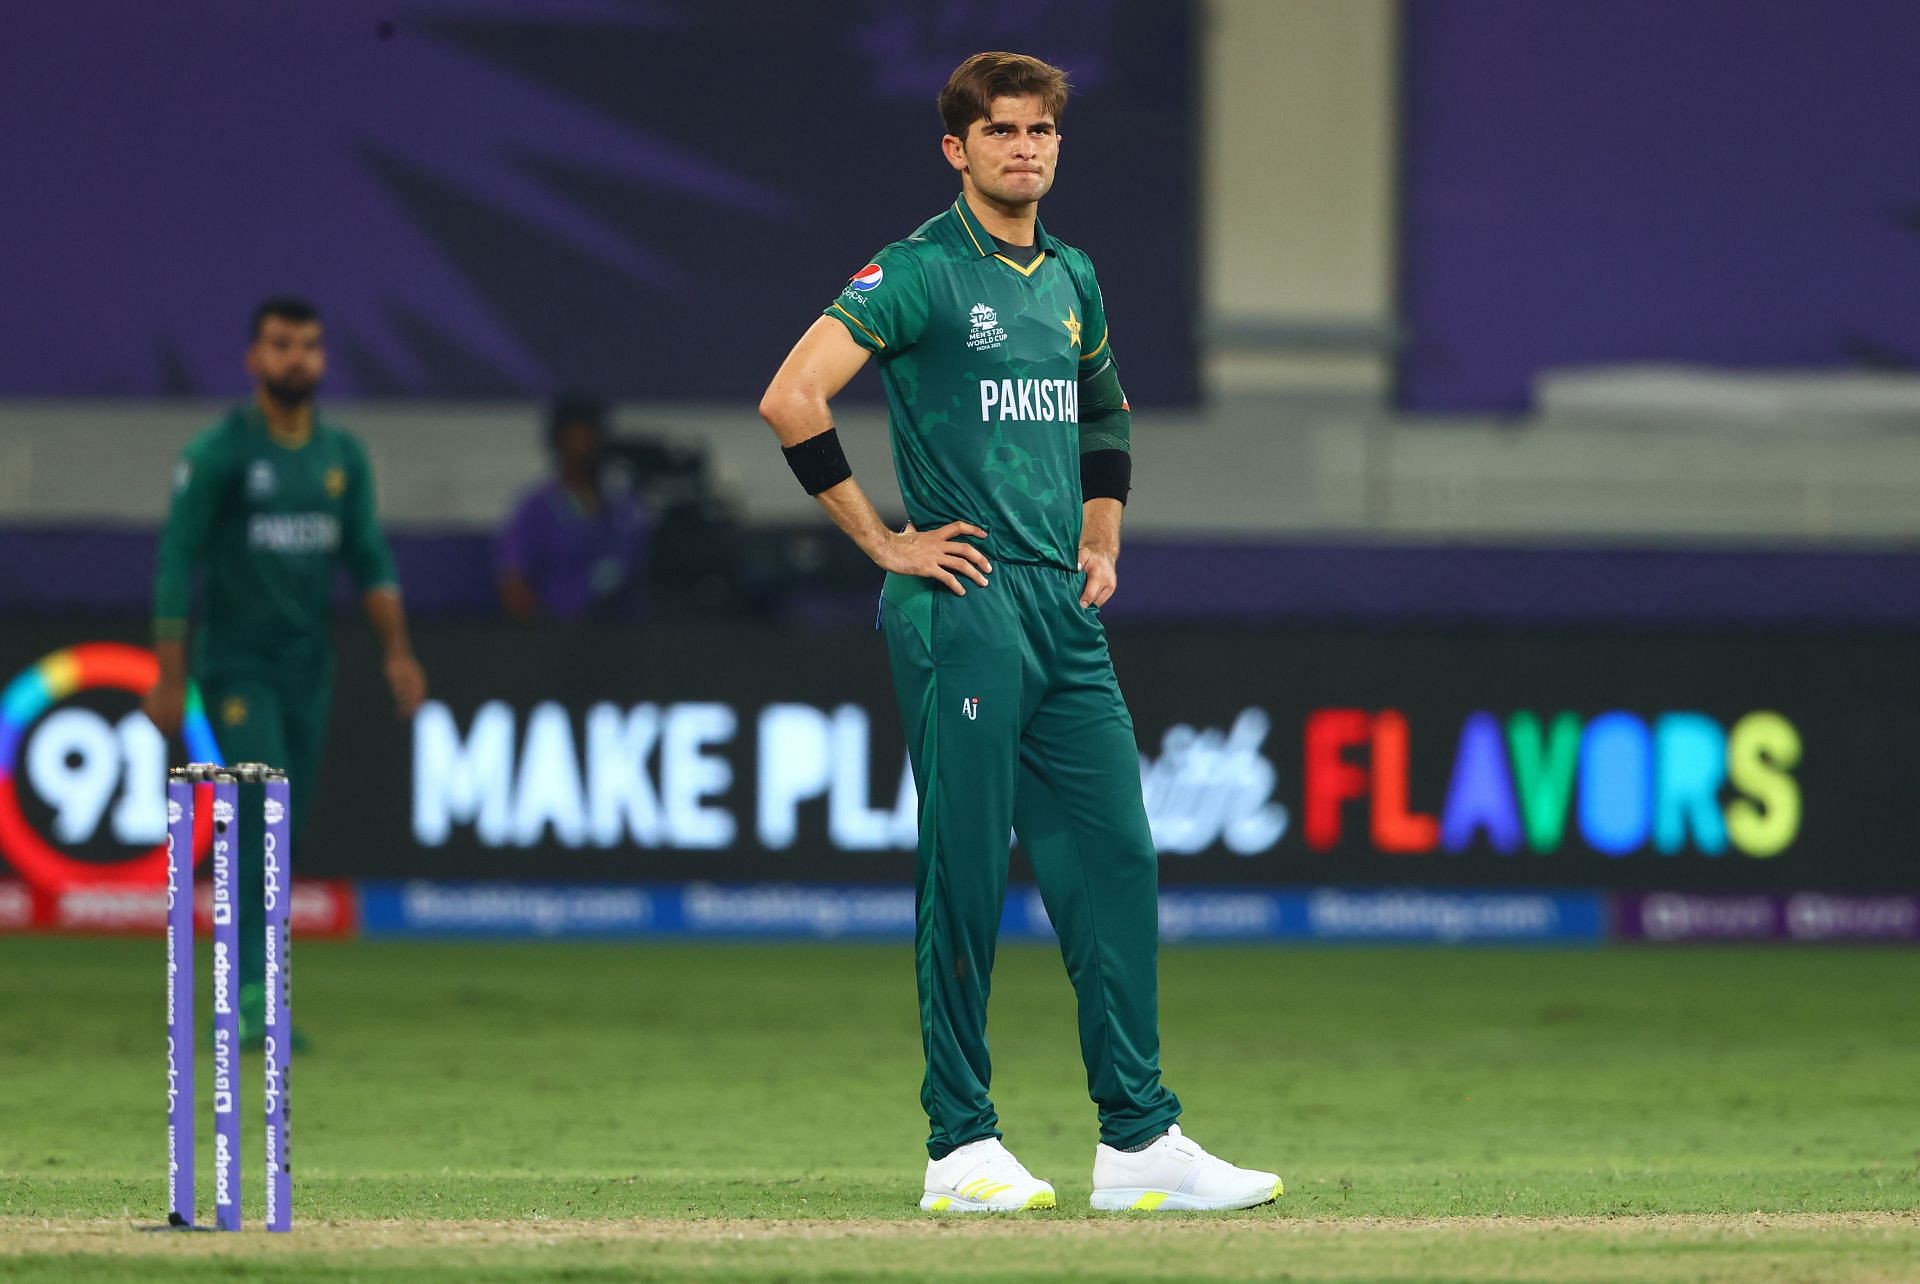 Shaheen Afridi is leading Lahore Qalandars in PSL 2022